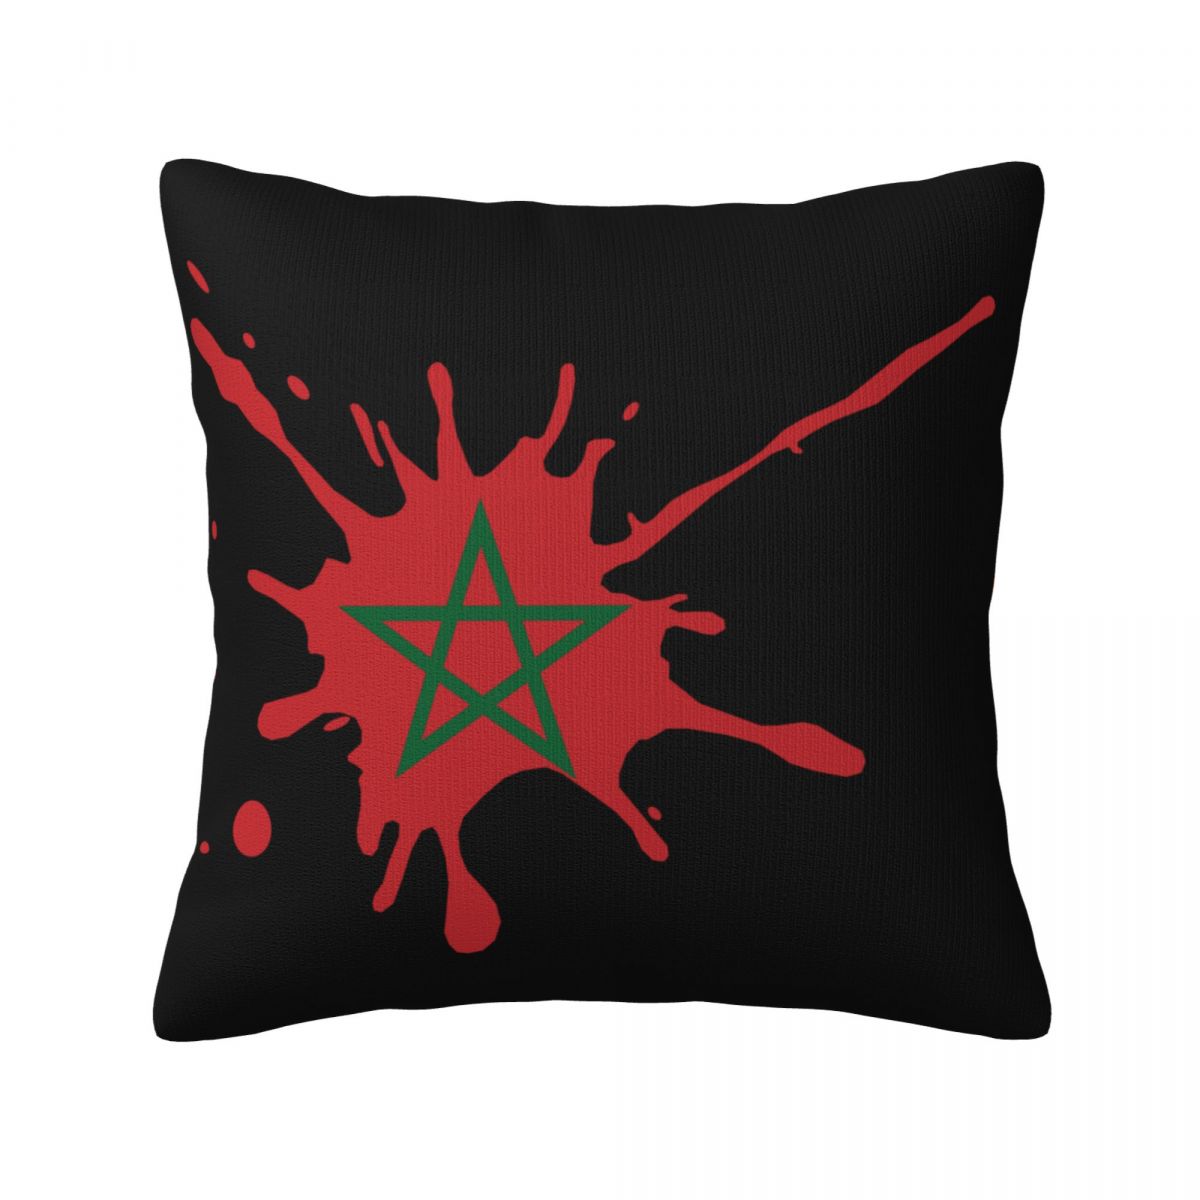 Morocco Ink Spatter Throw Pillows 18 x 18 inch